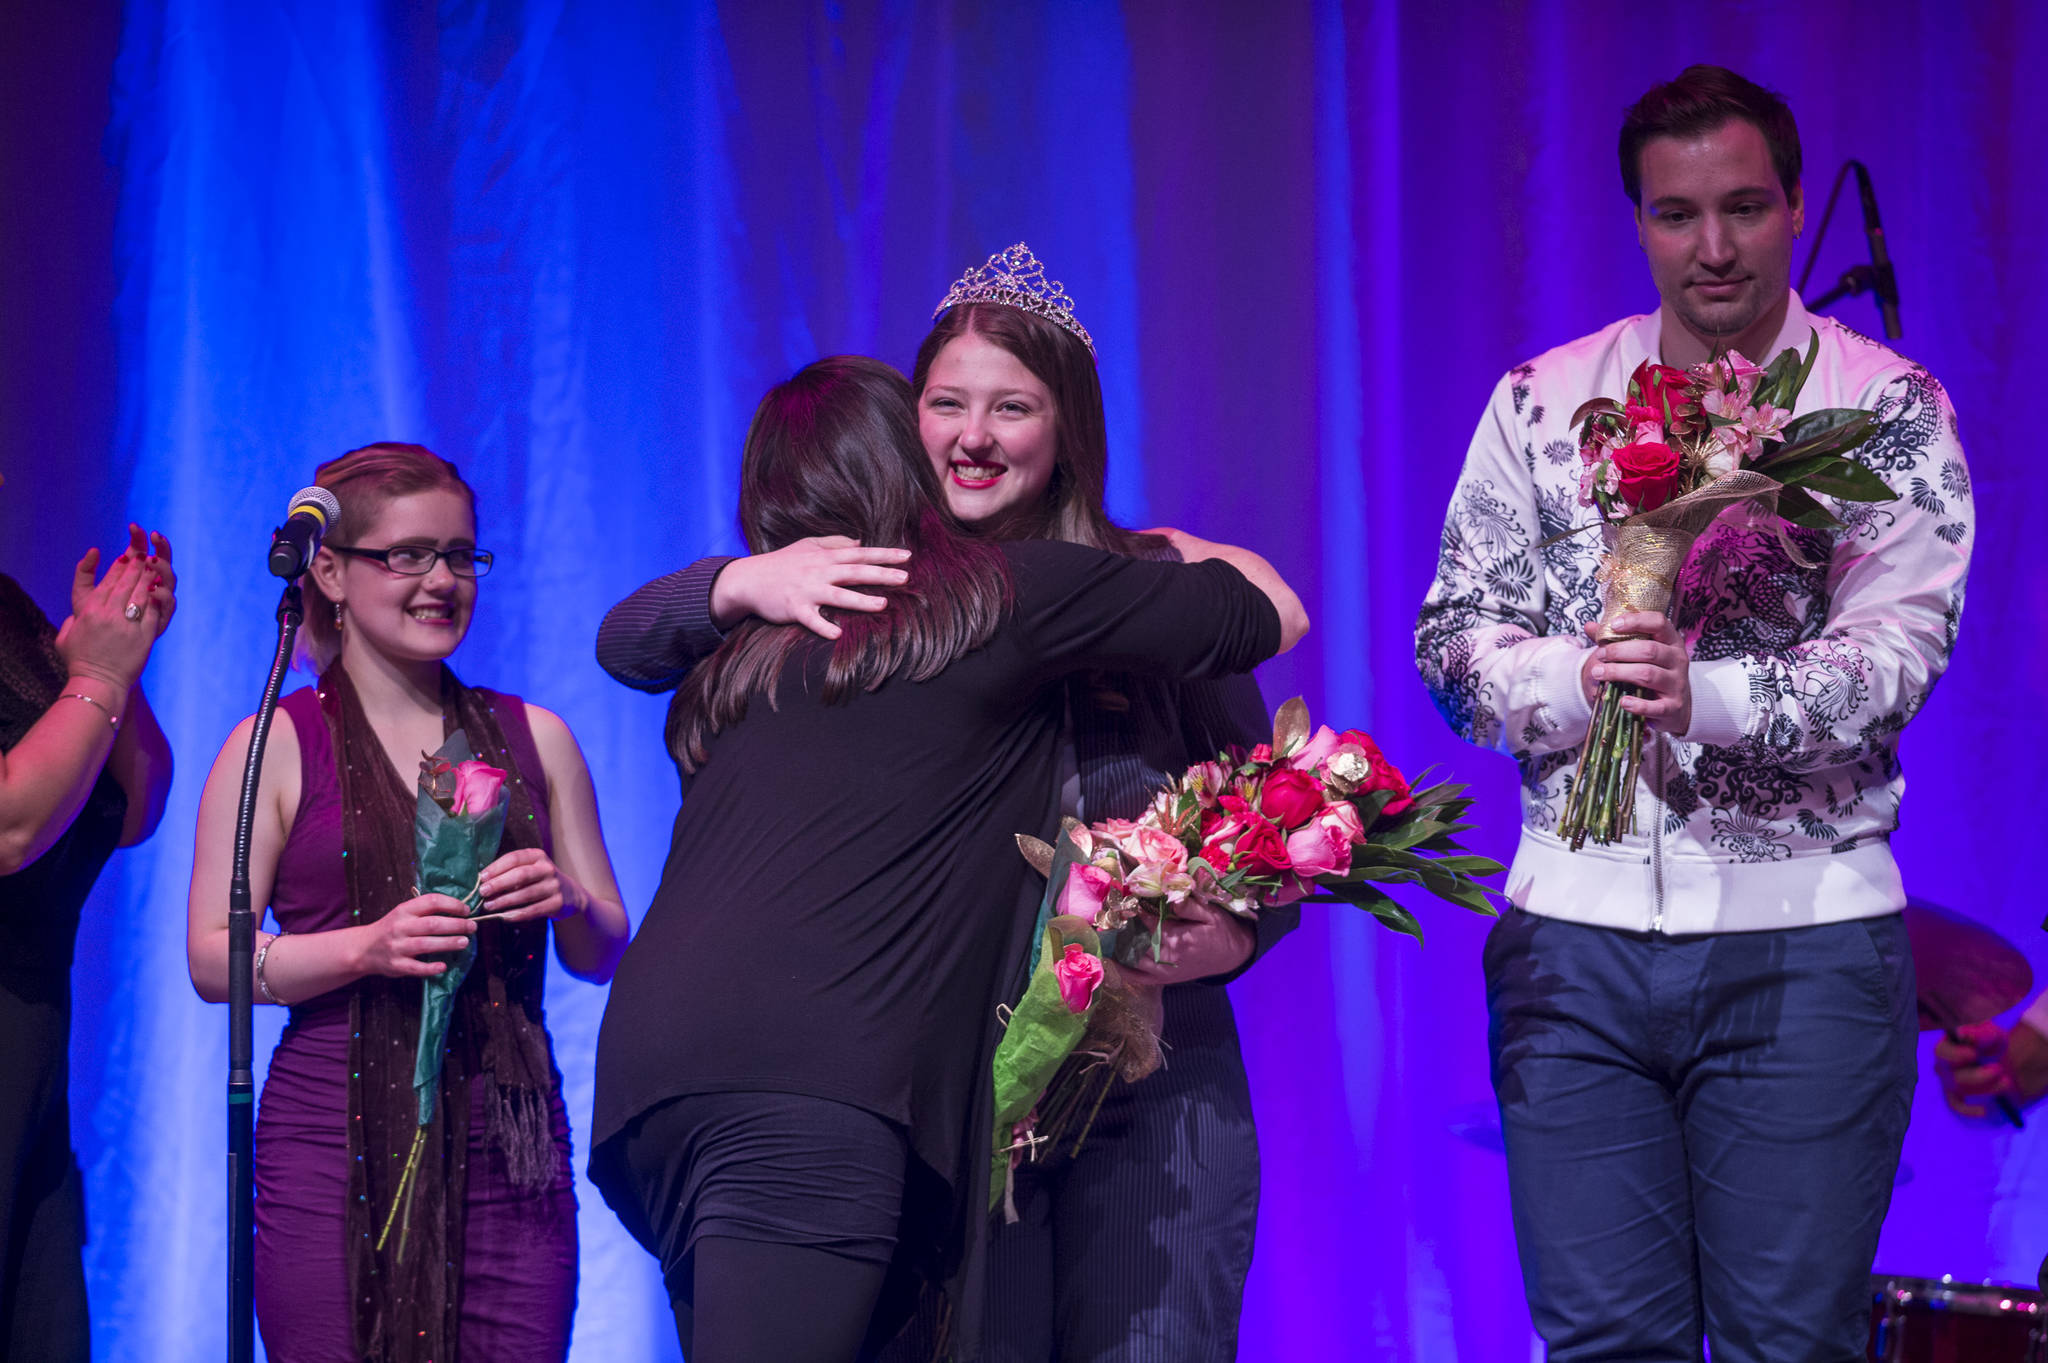 Briannah Letter, center, is crowned the champion Diva with Richard Carter, right, as first runner-up, and Lydia Rail, left, second runner-up, at her side at Juneau Lyric Opera’s production of “Who’s Your Diva?” at Centennial Hall on Saturday, Sept. 29, 2018. (Michael Penn | Juneau Empire)